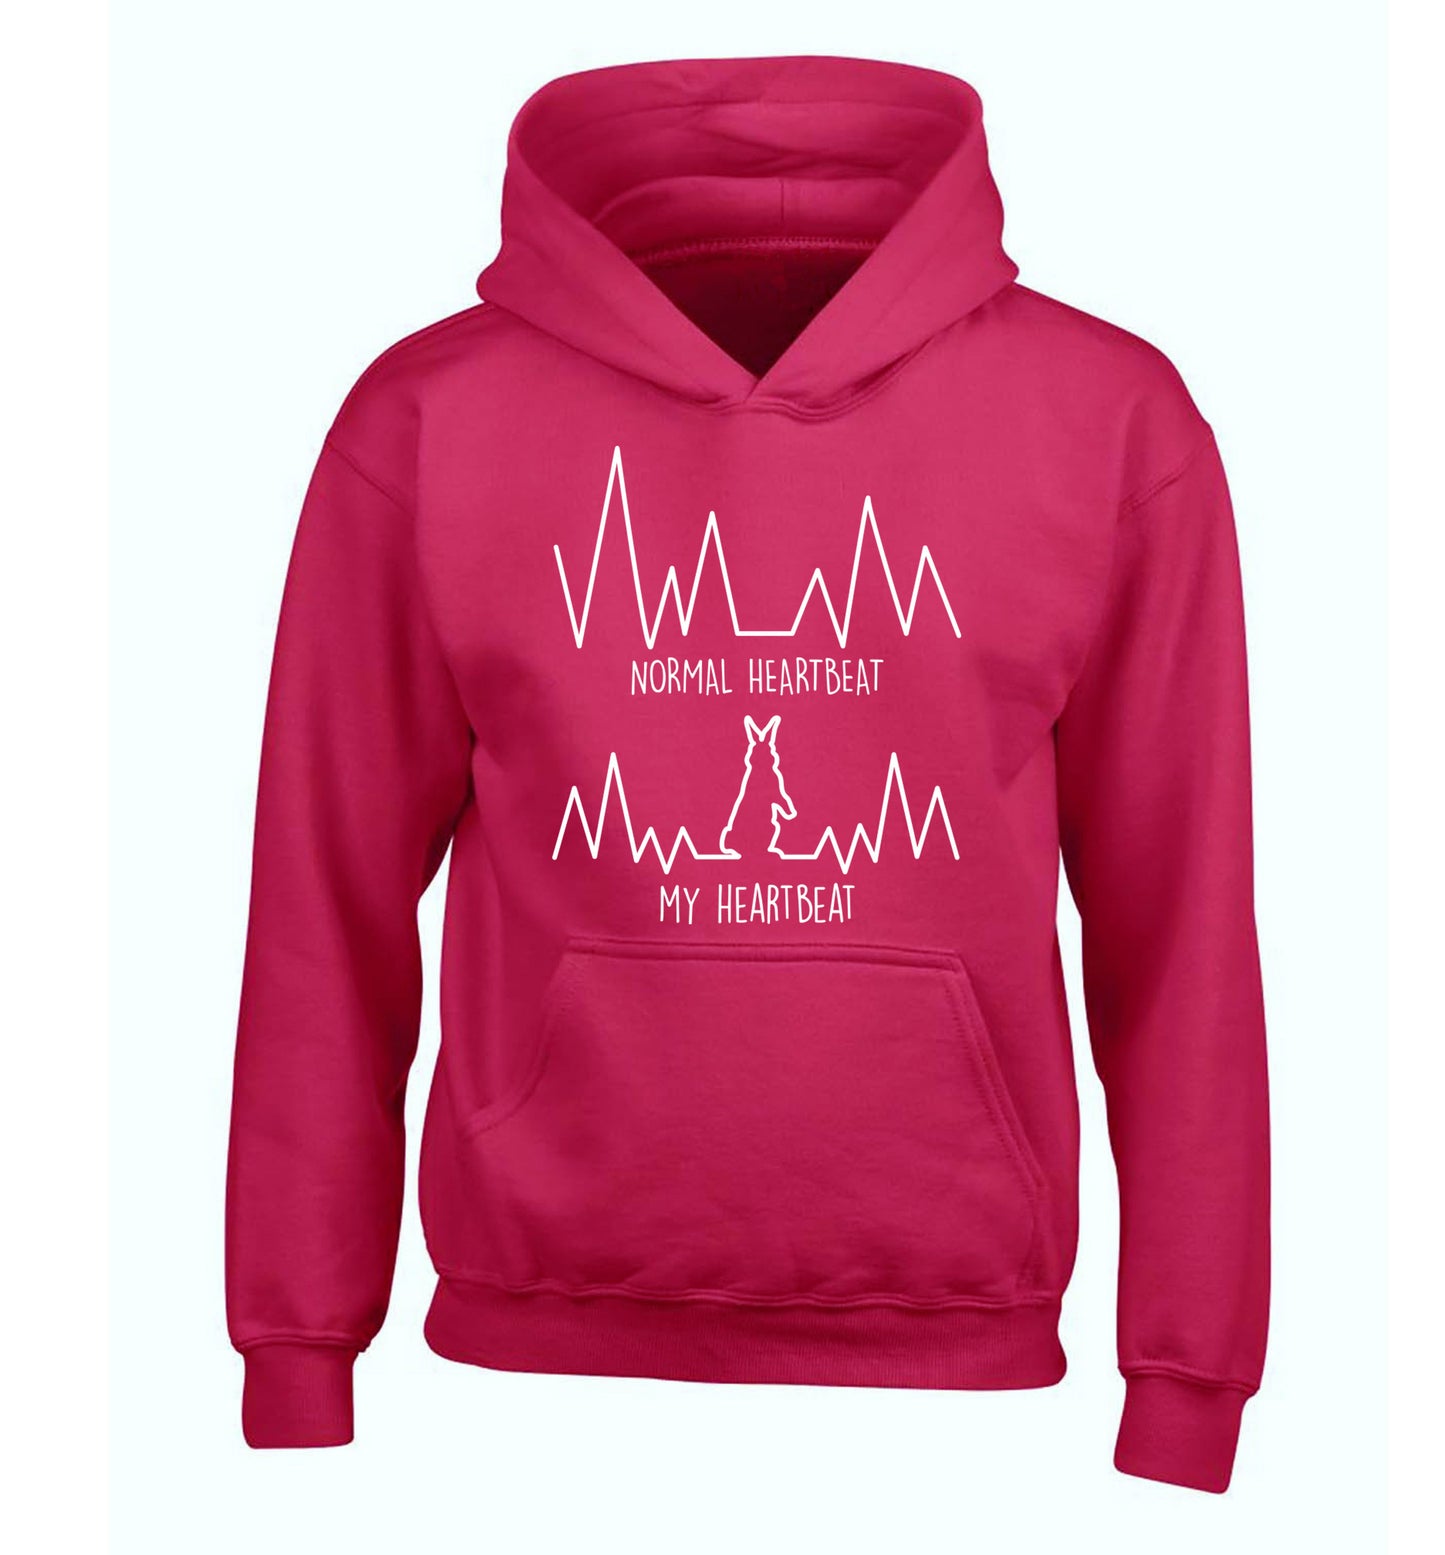 Normal heartbeat, my heartbeat rabbit lover children's pink hoodie 12-14 Years